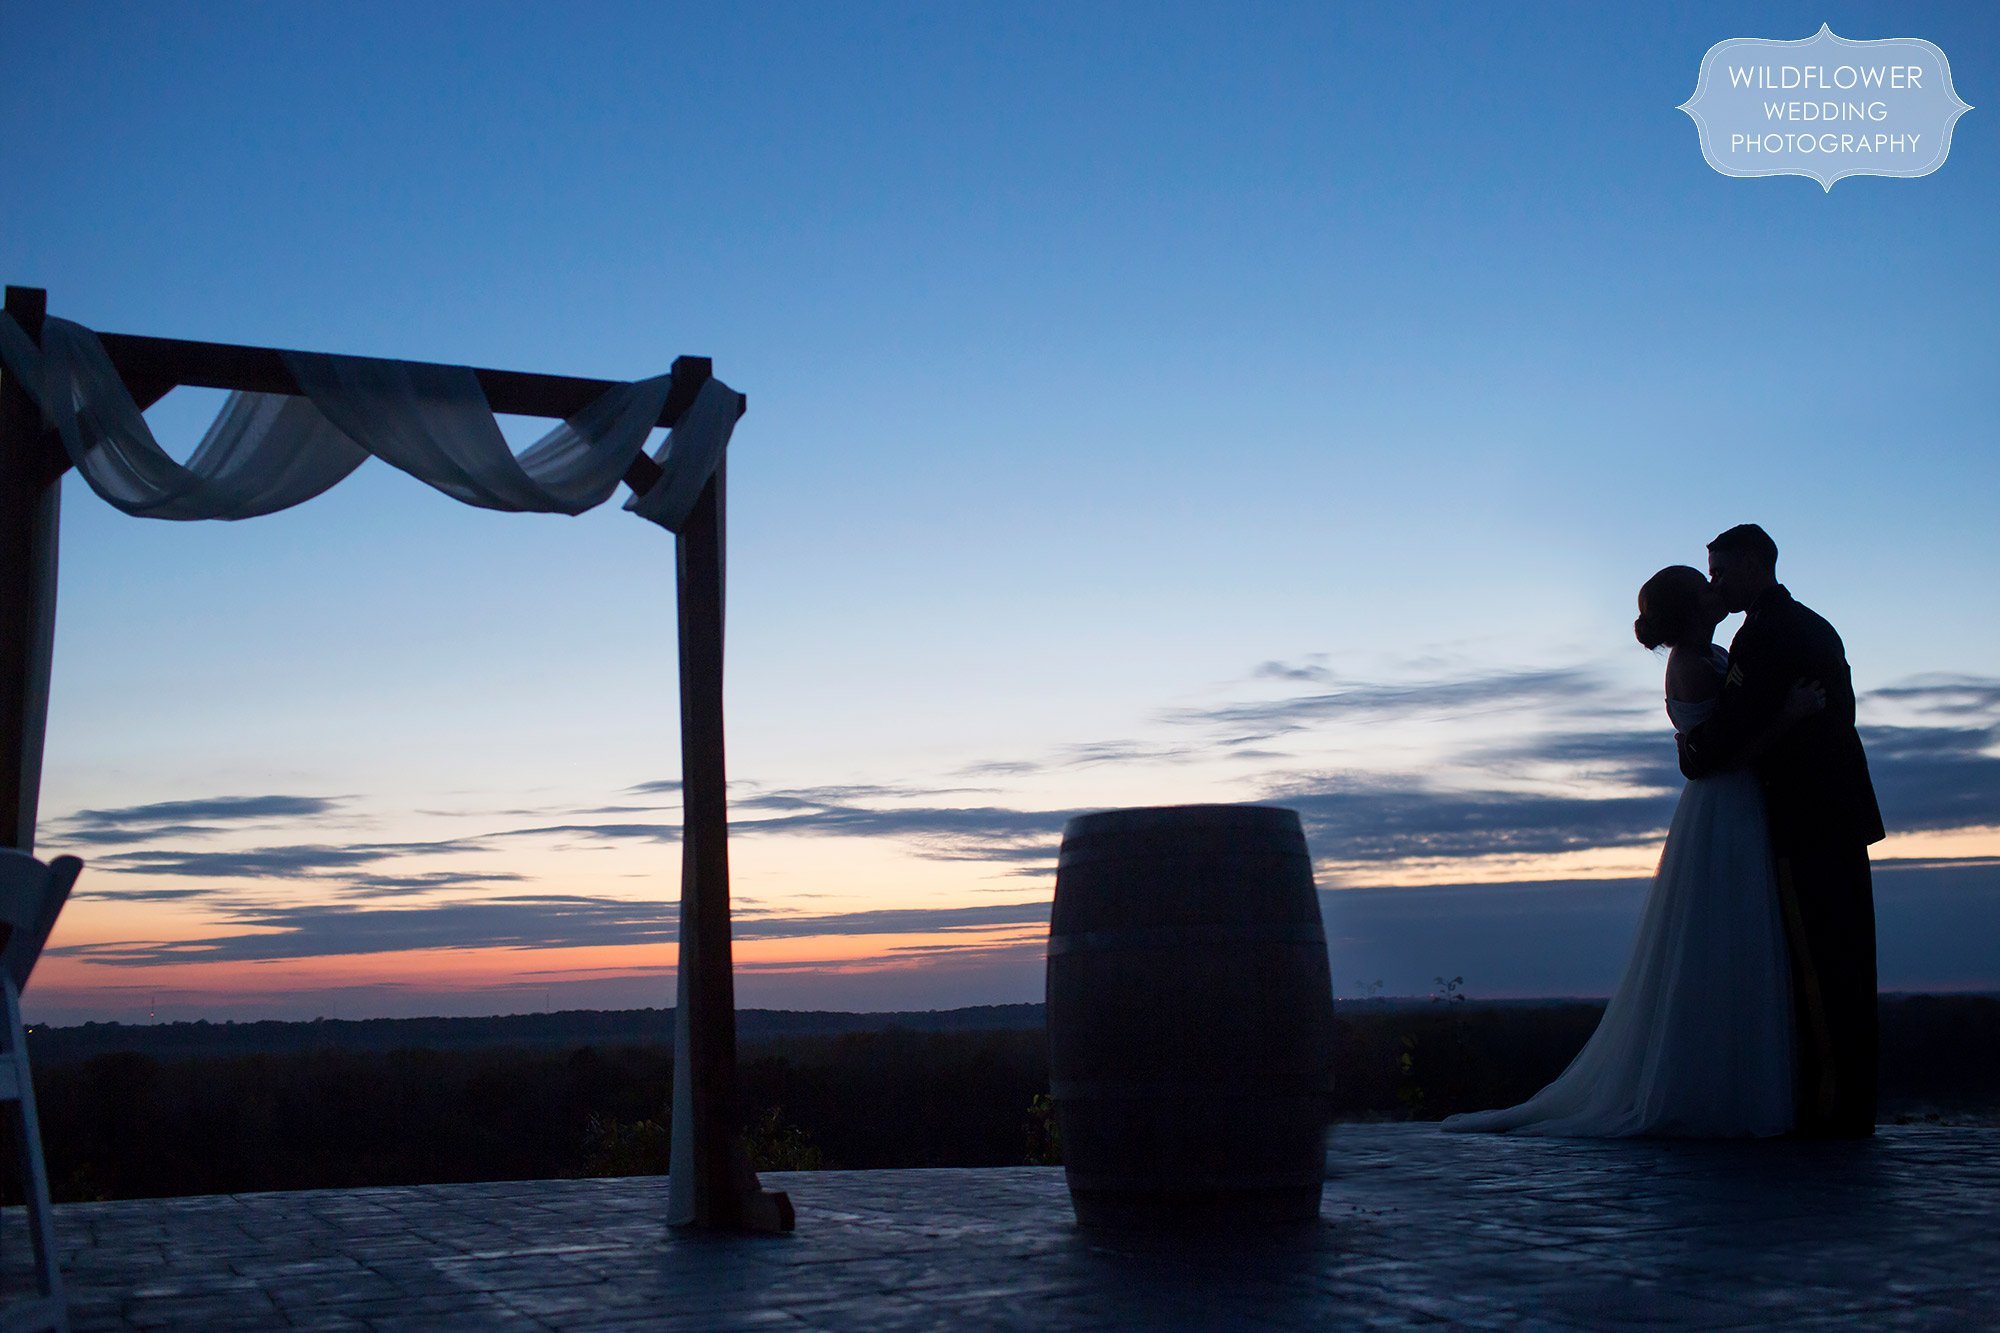 Beautiful silhouette of the bride and groom kissing on the blufftop with twilight blue light.